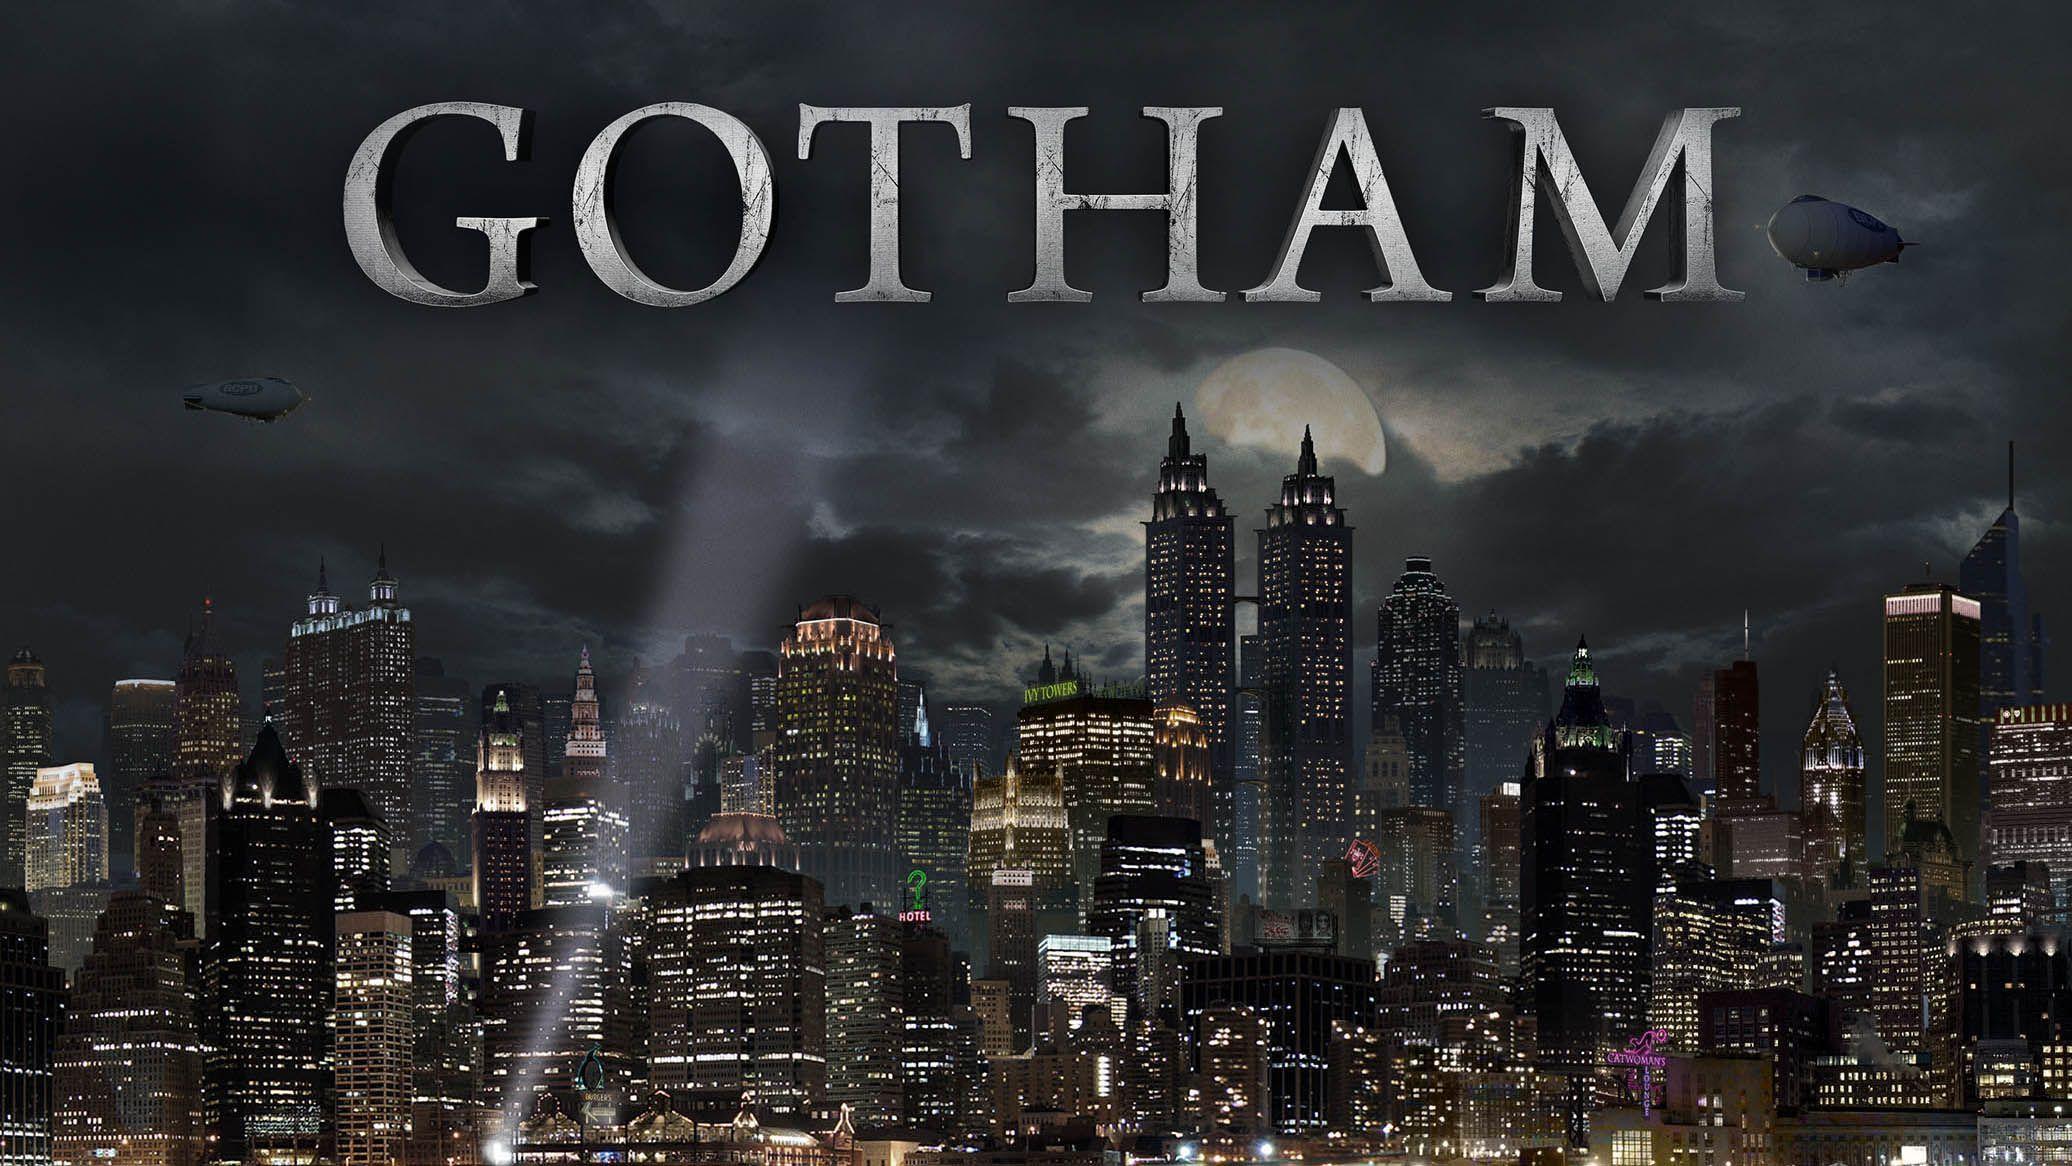 The Gotham Wallpaper. Let the Nerd Out. Gotham and Movie